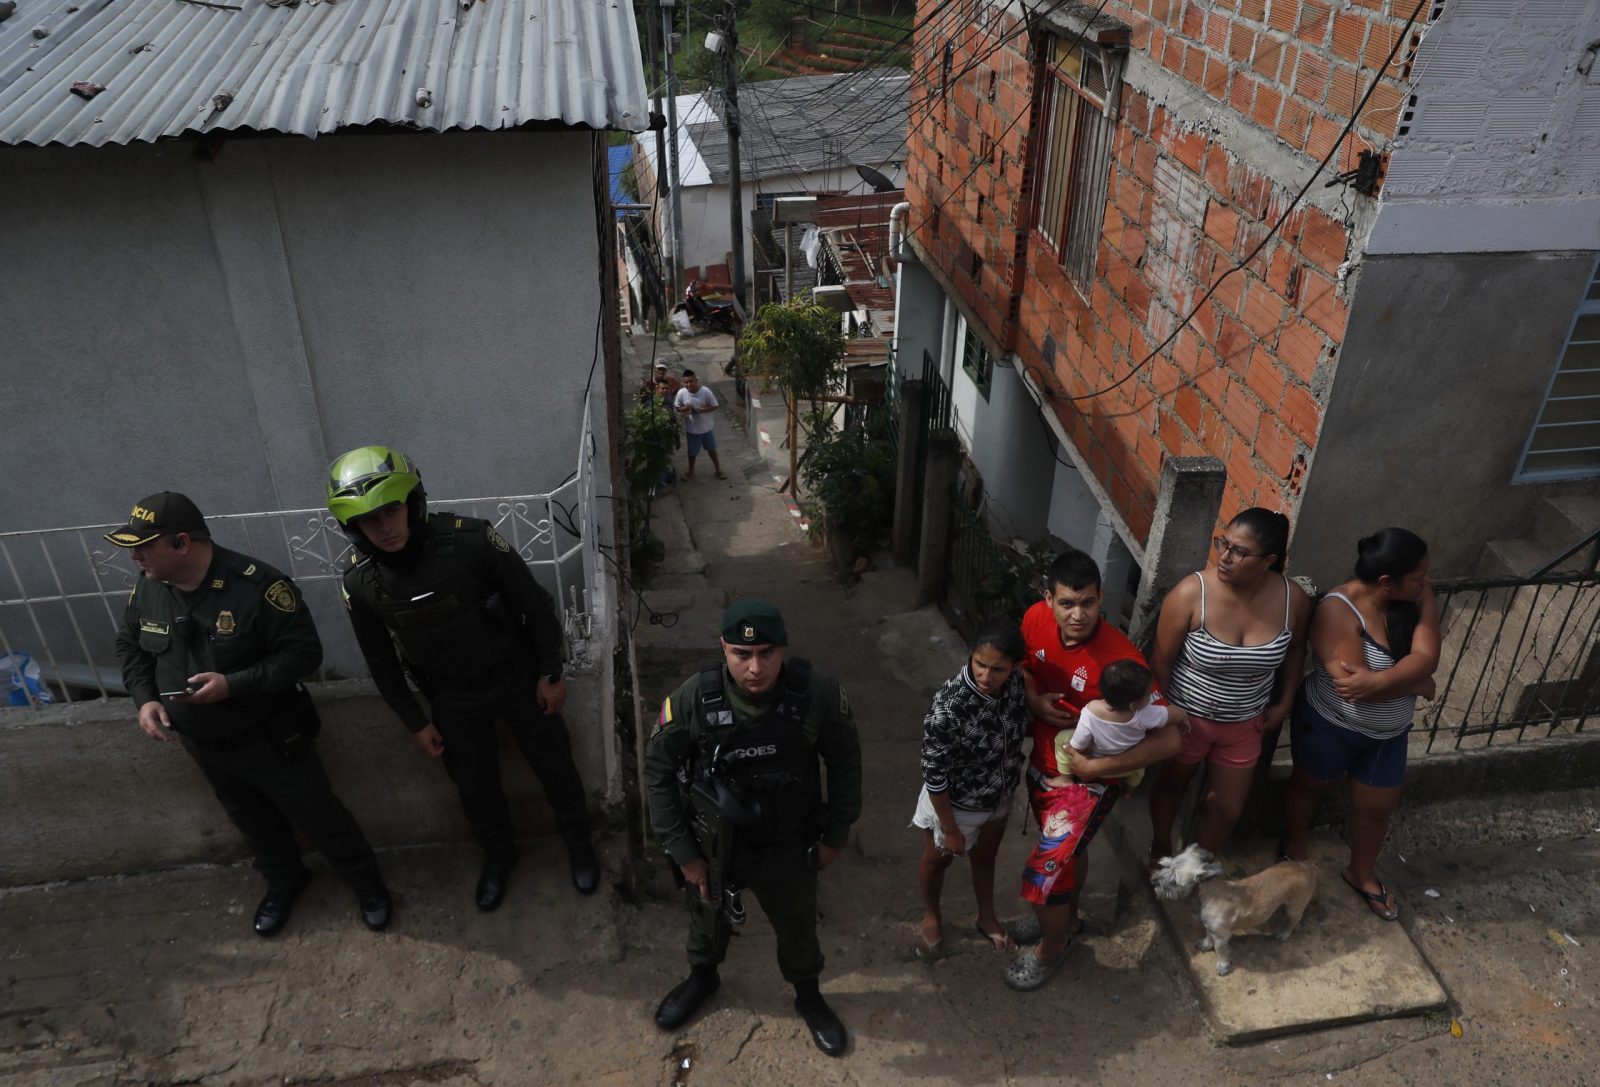 epa10223126 Police stand guard in the area where violence took place in the Brisas de Mayo neighborhood, in Cali, Colombia, 04 October 2022. At least five people were killed and two injured when armed men attacked a group of people who were on a corner of the Siloe neighborhood.  EPA/ERNESTO GUZMAN JR